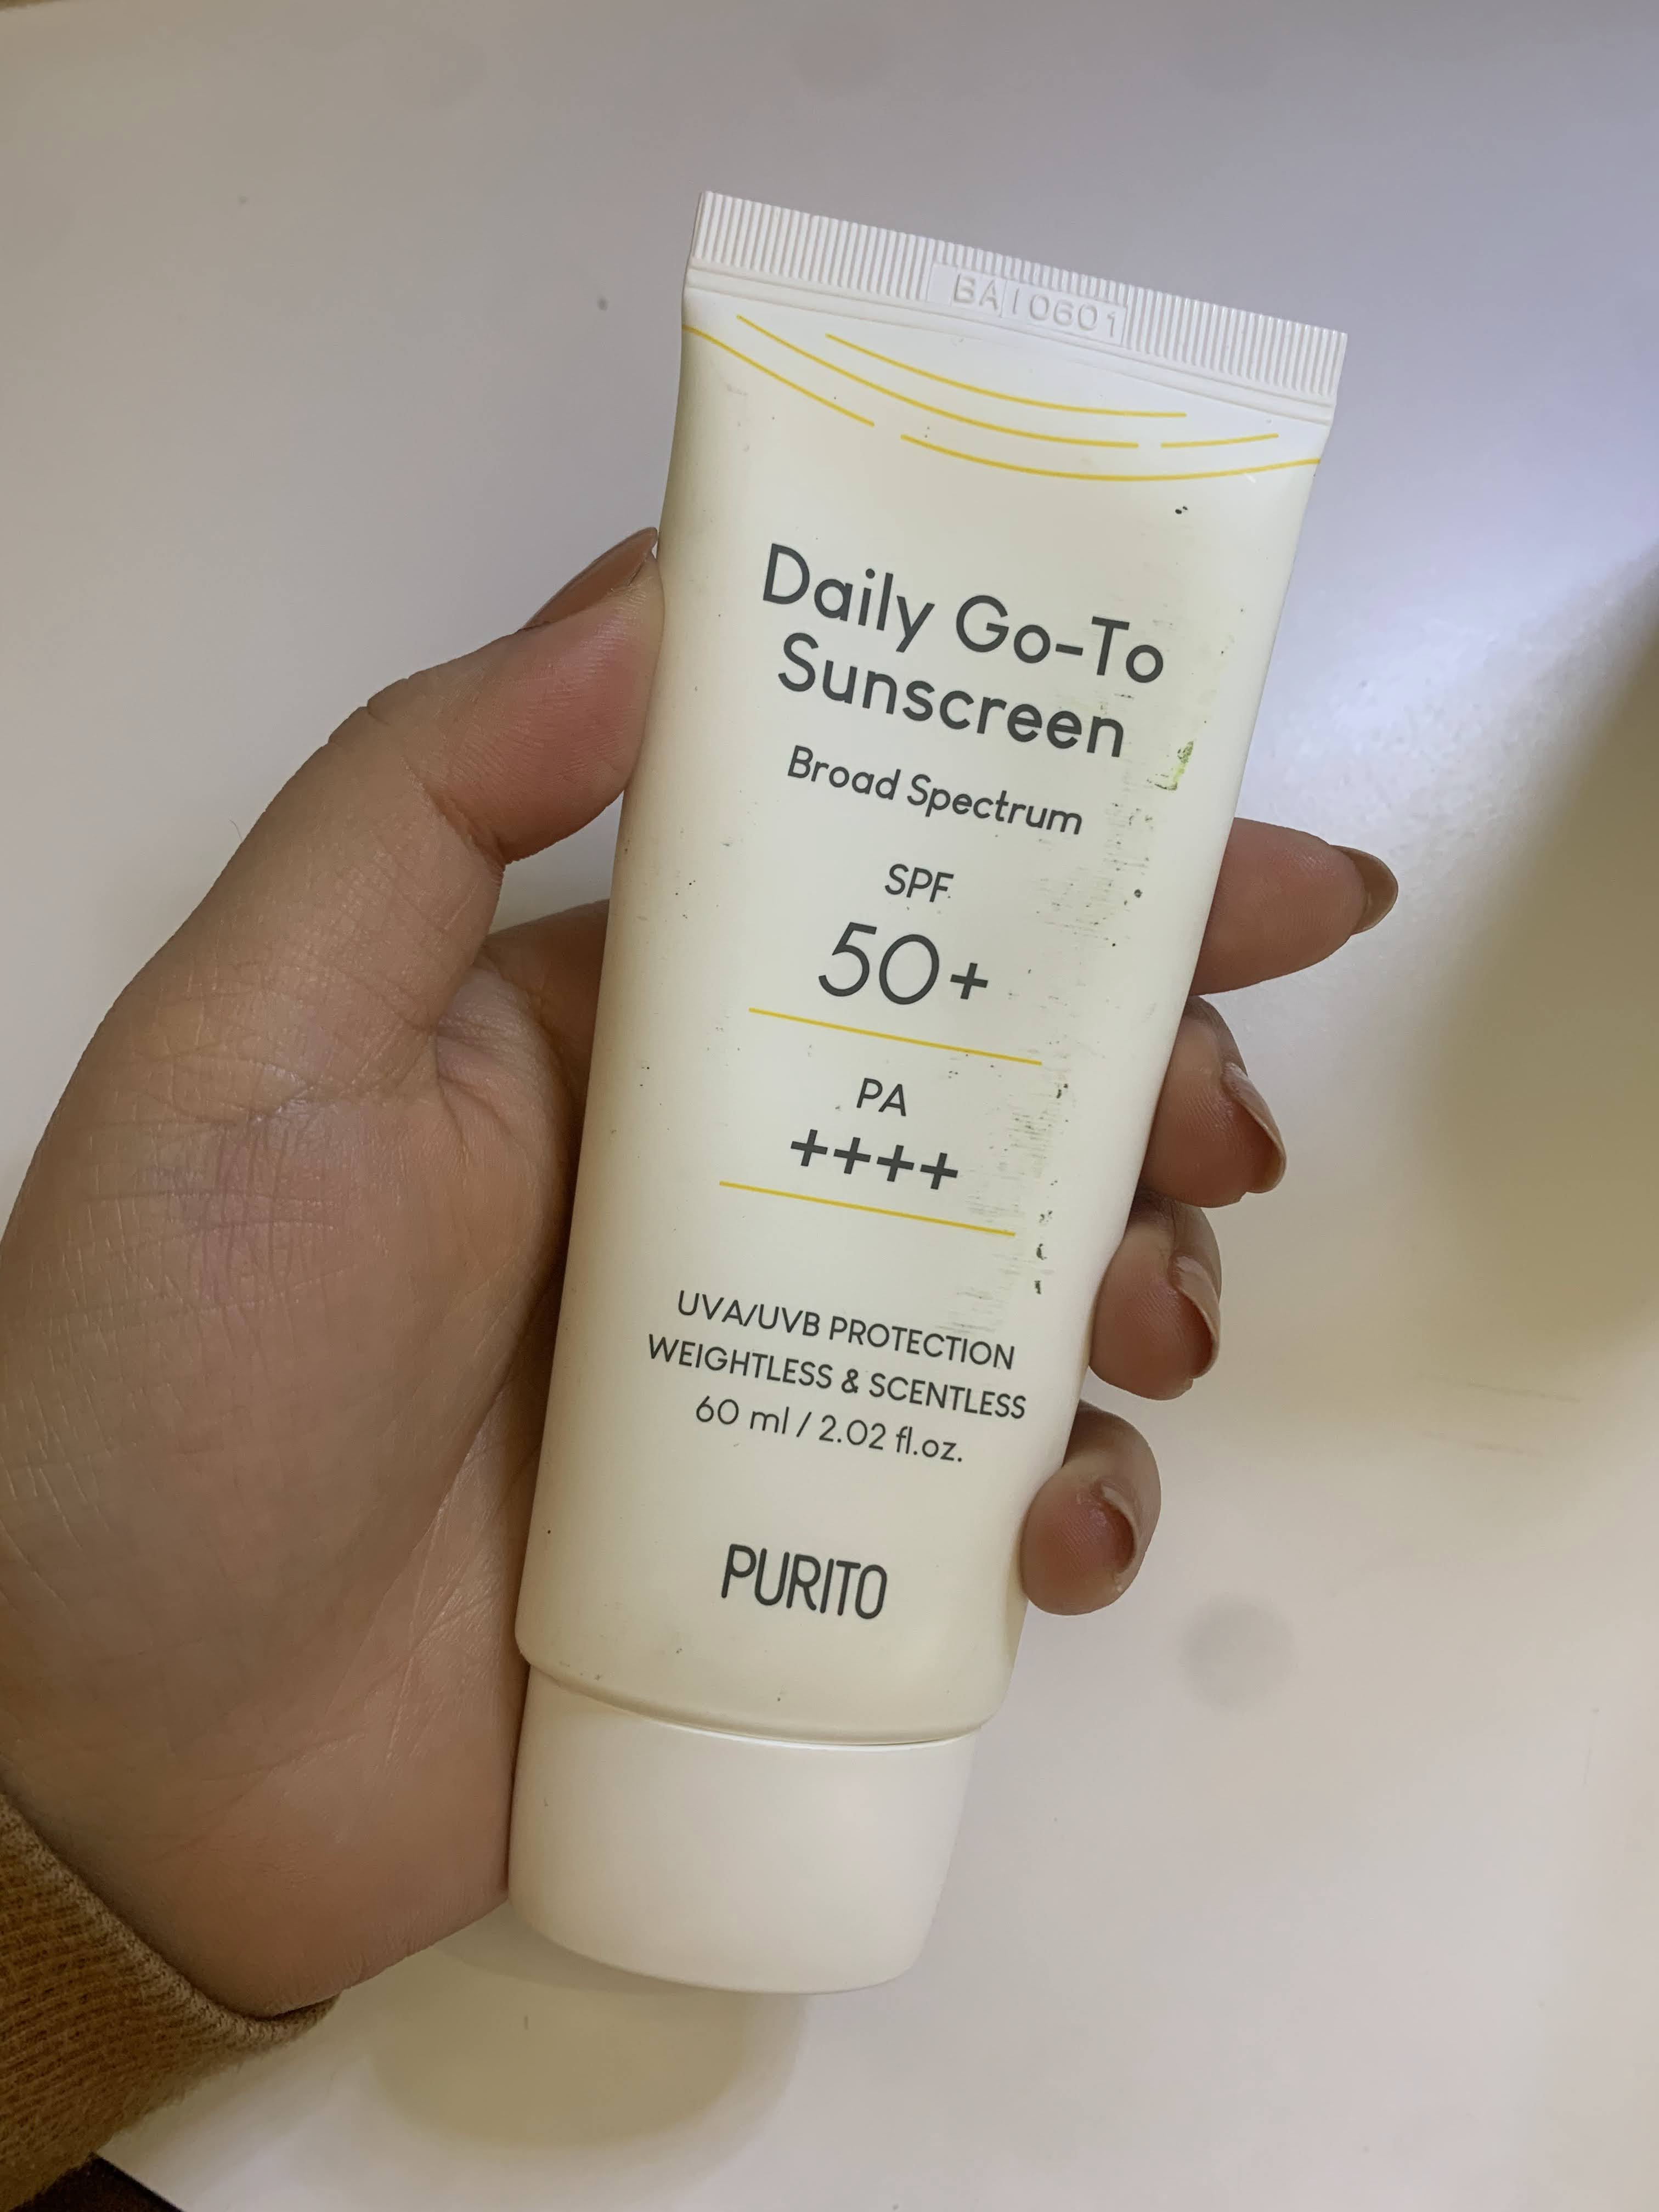 Photo of the Purito Daily Go-To Sunscreen